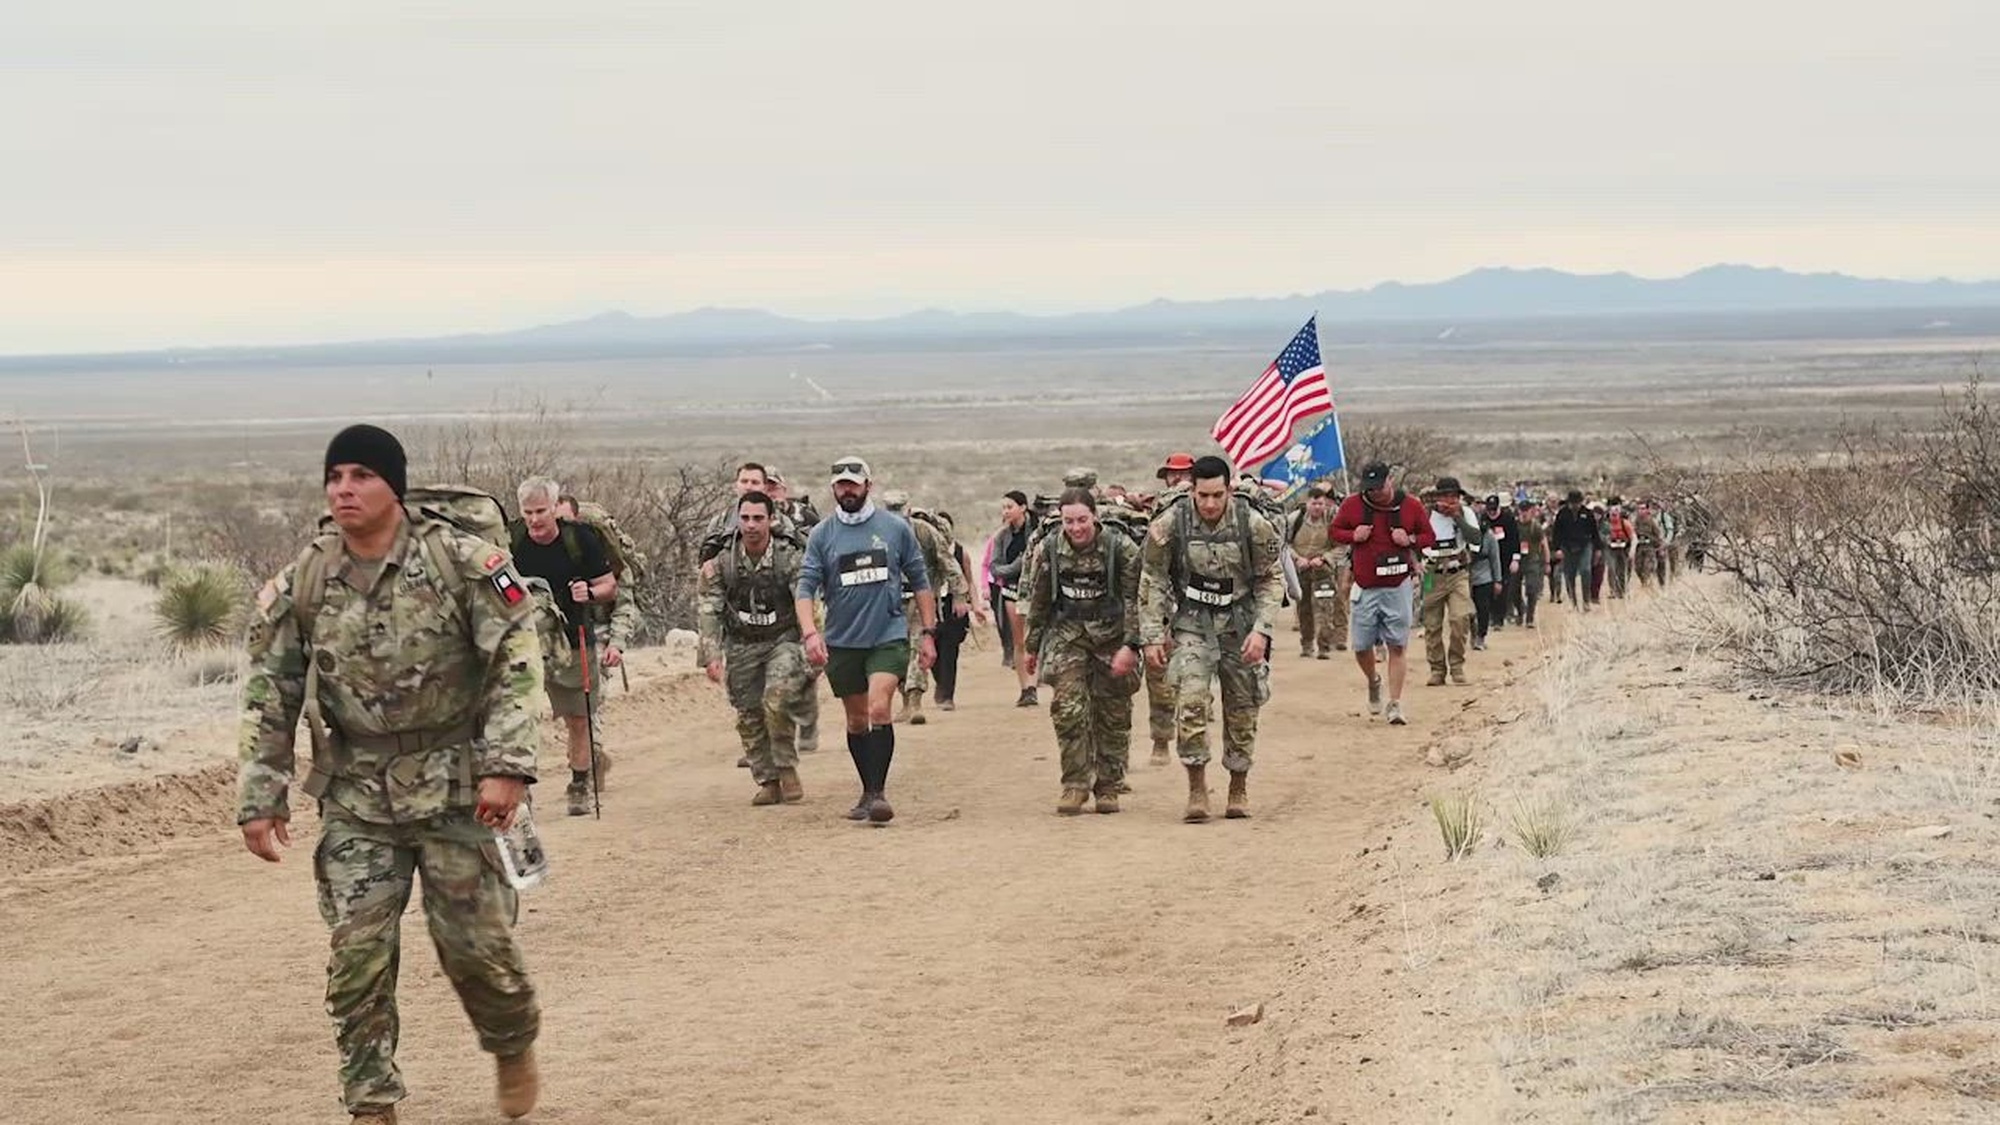 Over 5,000 service members and civilians participate in the 35th Bataan Memorial Death March, White Sands Missile Range, New Mexico, March 16, 2024. The marathon is held annually to honor the sacrifices of the U.S. and Filipino service members who were captured by the Japanese and forced to march approximately 65 miles through the jungle to Camp O’Donnell, a former Philippine army training center where the prisoners were interned. (DoD video by Navy Petty Officer 1st Class Reina J. Delgado & Joseph Clark)